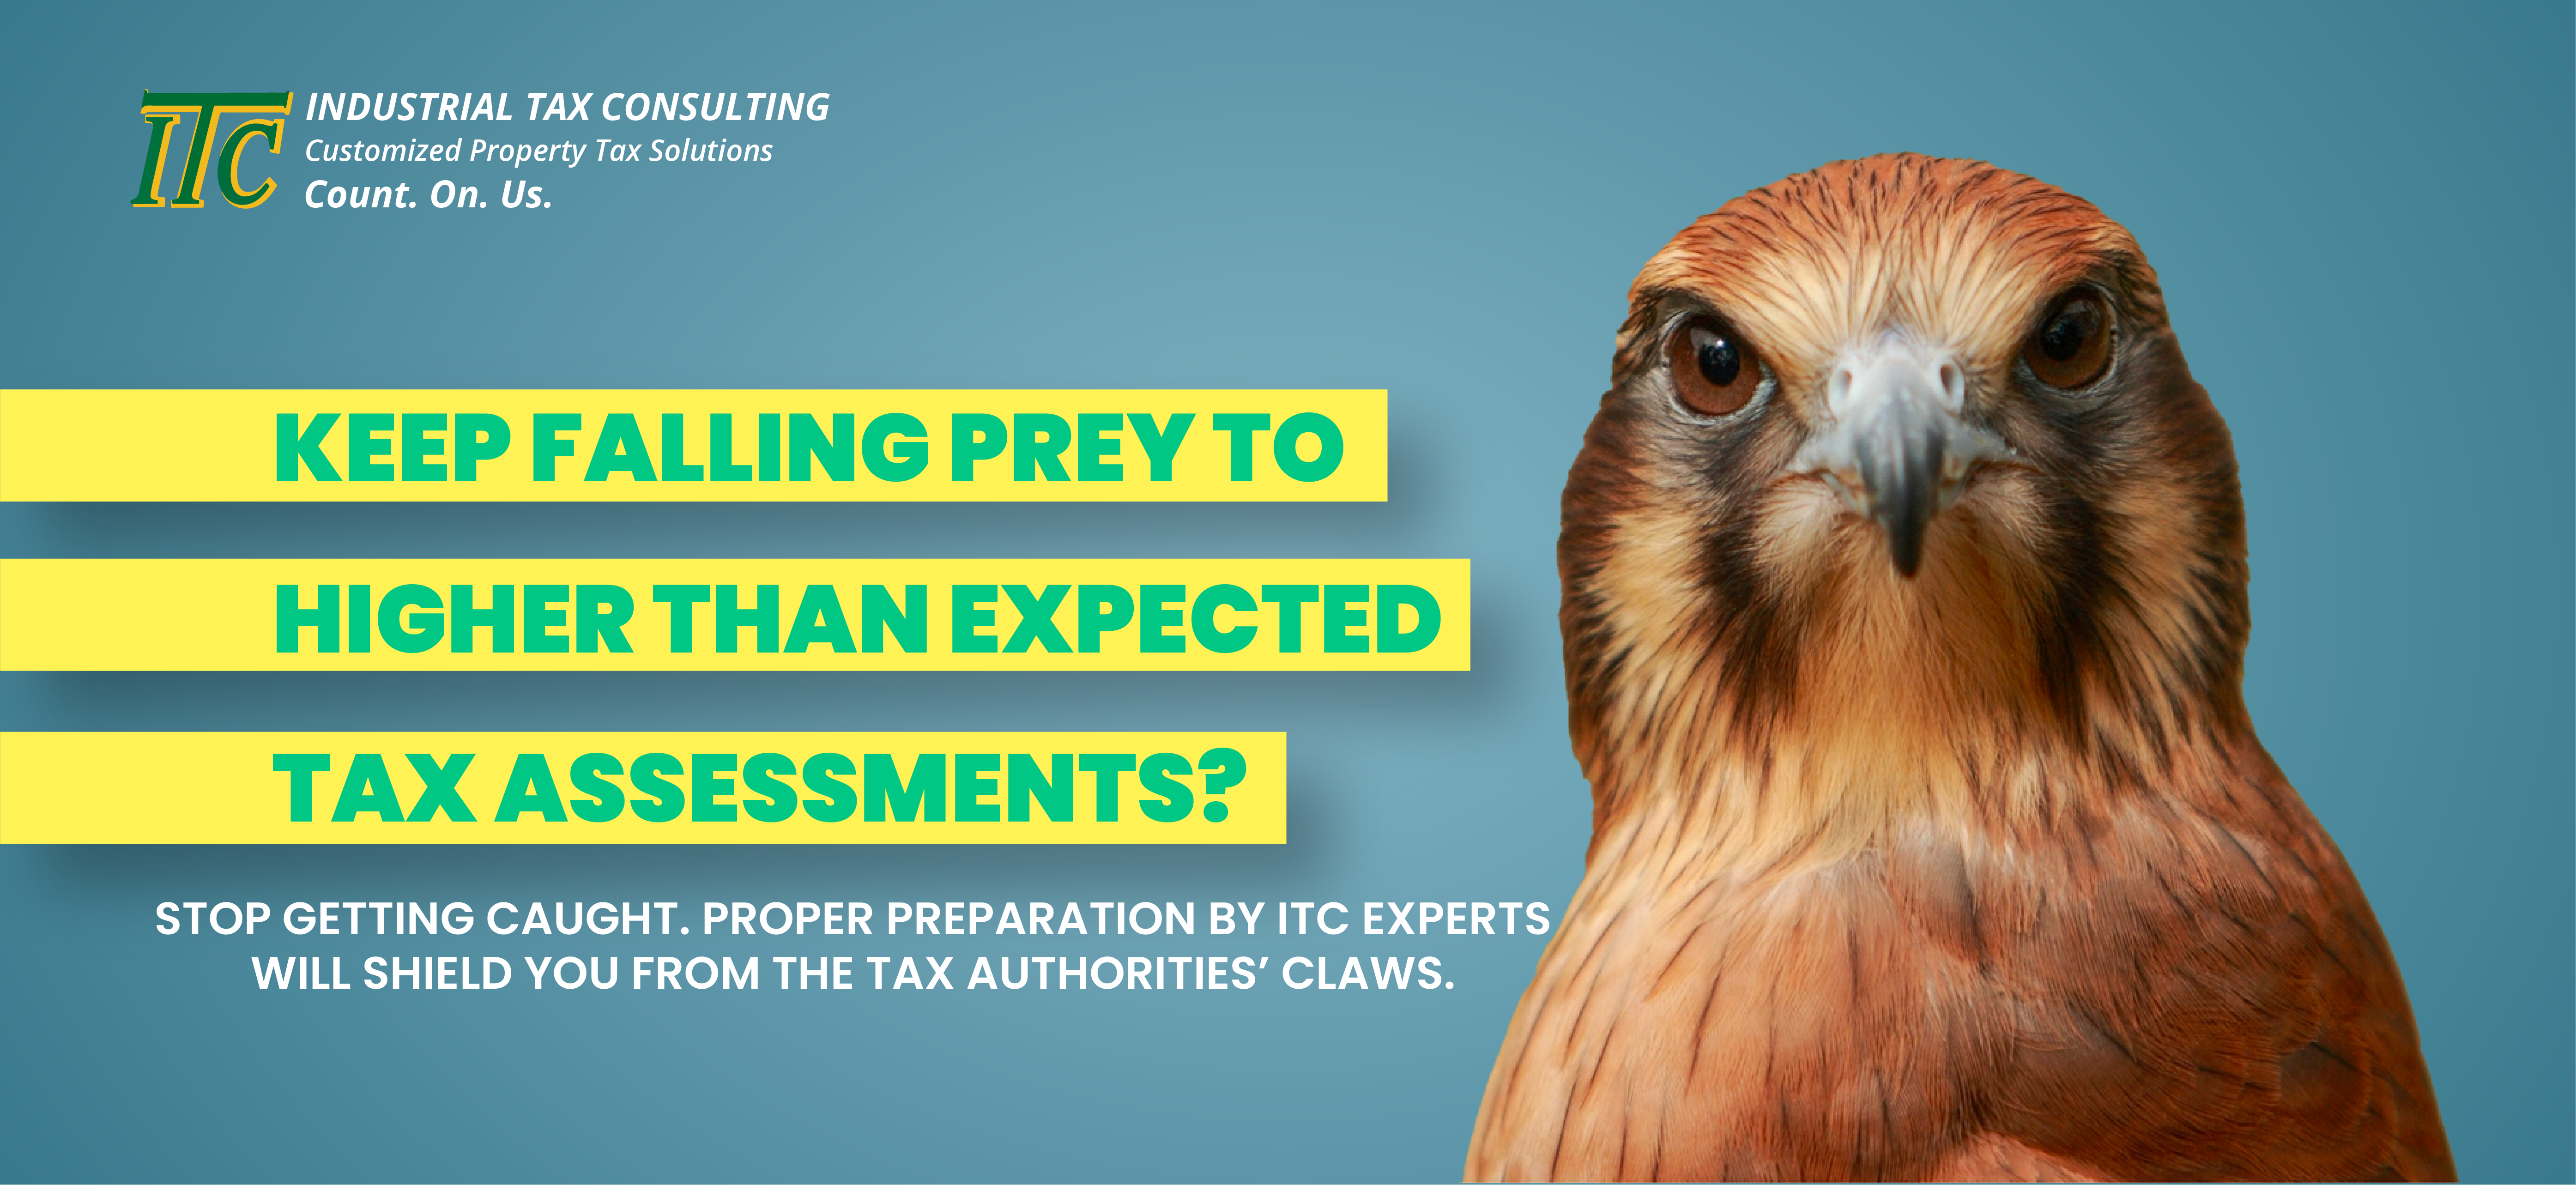 ITC Tax Assessment ad with a hawk